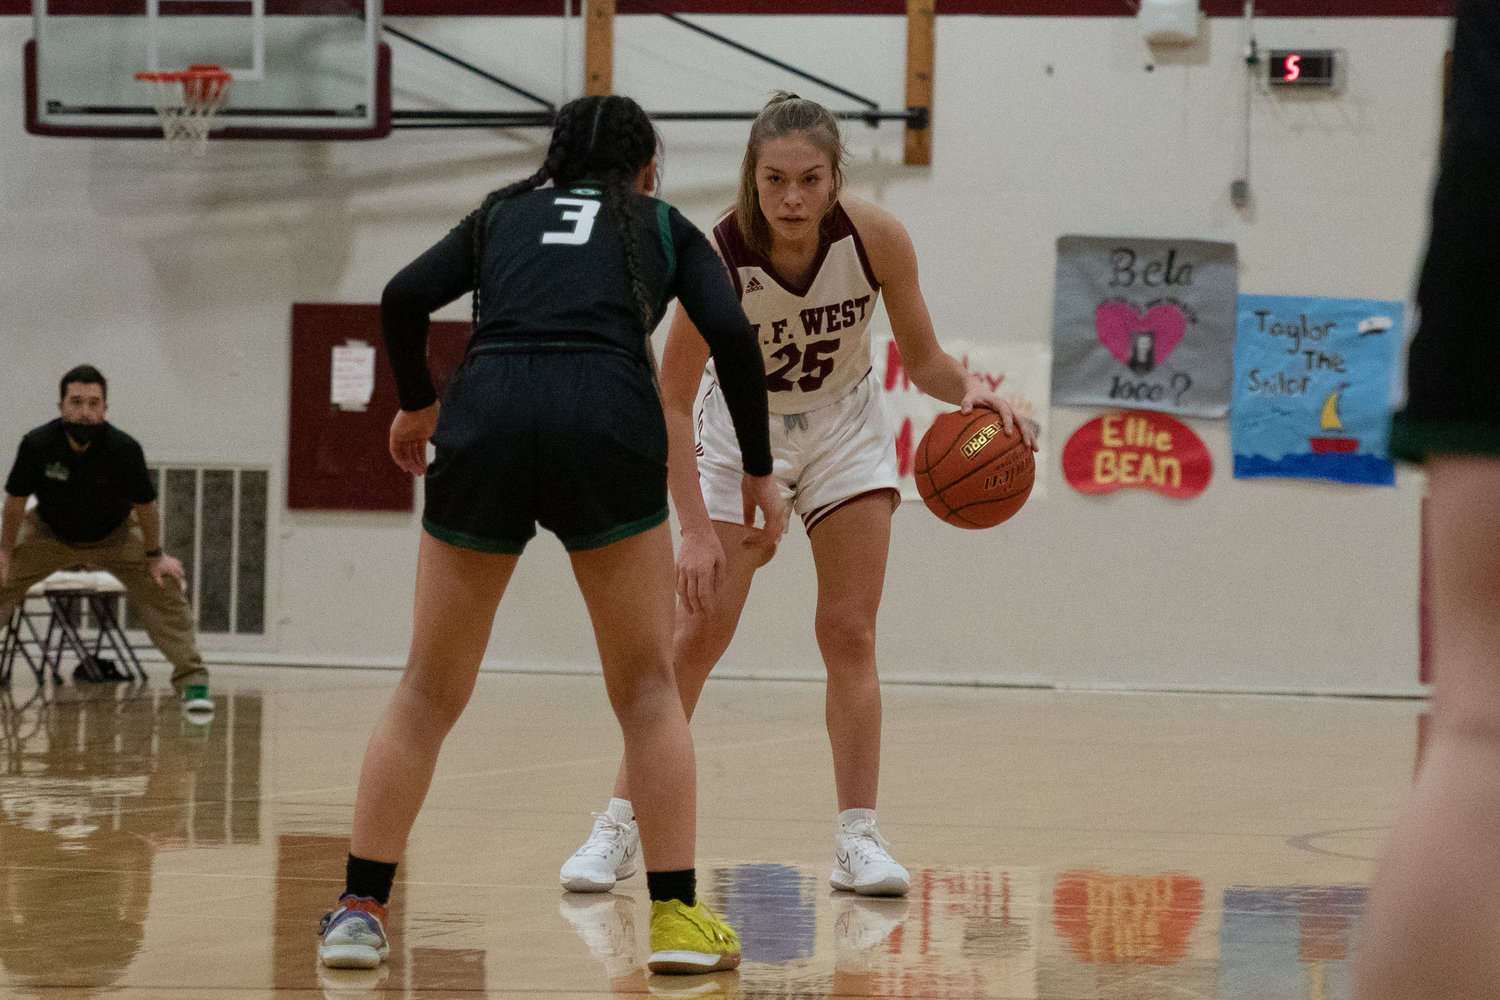 W.F. West guard Kyla McCallum stares down her defender as the Bearcats prep to run a play against Klahowya Jan. 15.